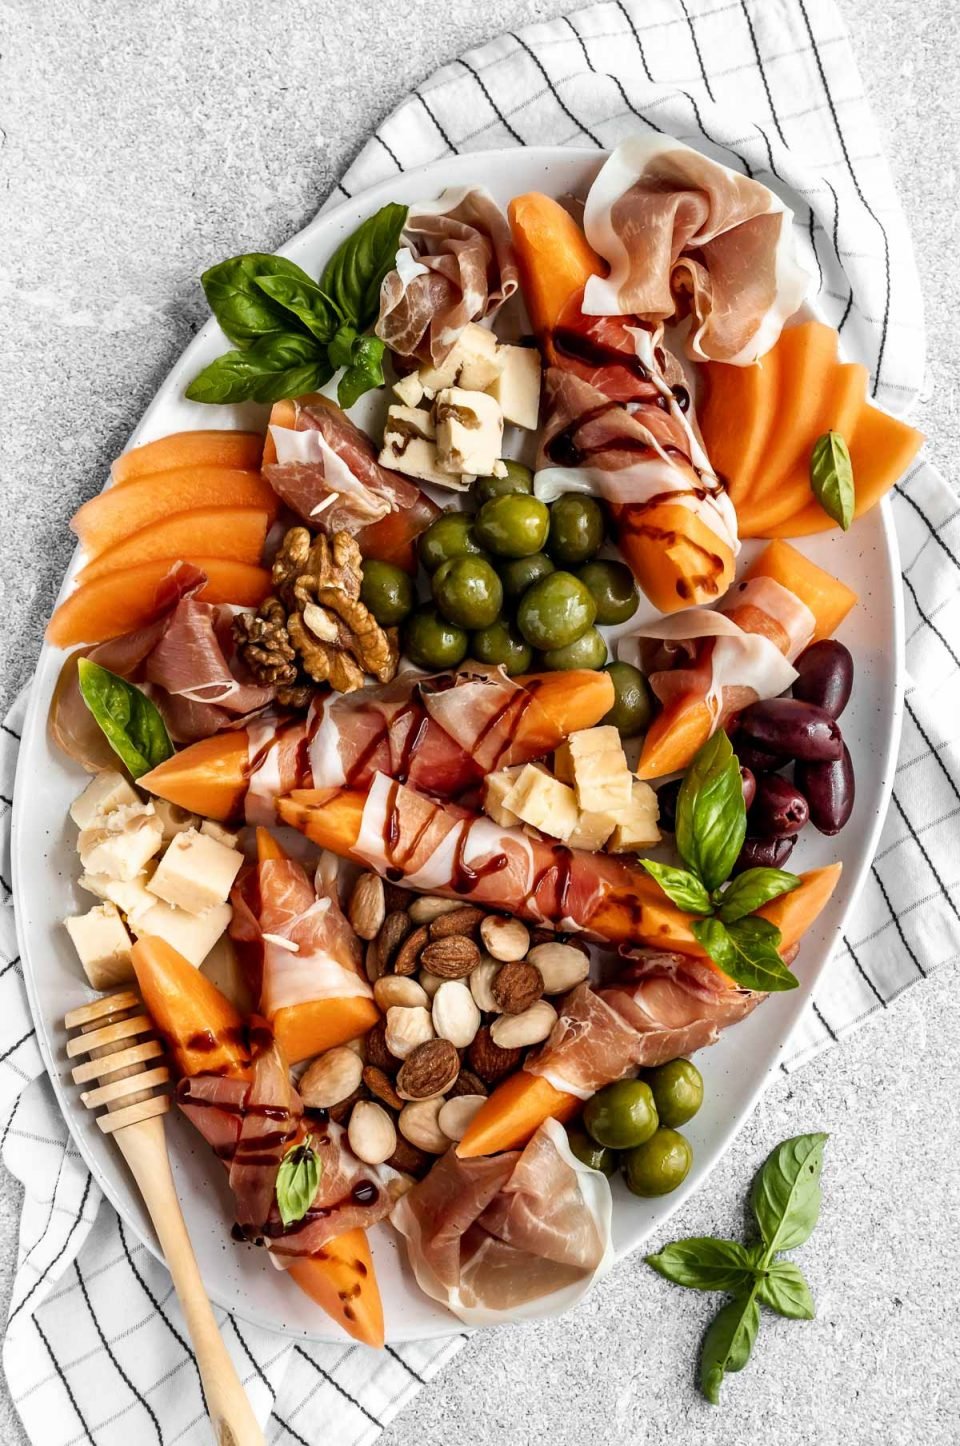 Prosciutto and melon cheese board! Prosciutto-Wrapped Cantaloupe on a large serving platter with olives, nuts, cheese, & fresh basil leaves. Some pieces of prosciutto-wrapped melon are drizzled with balsamic syrup.